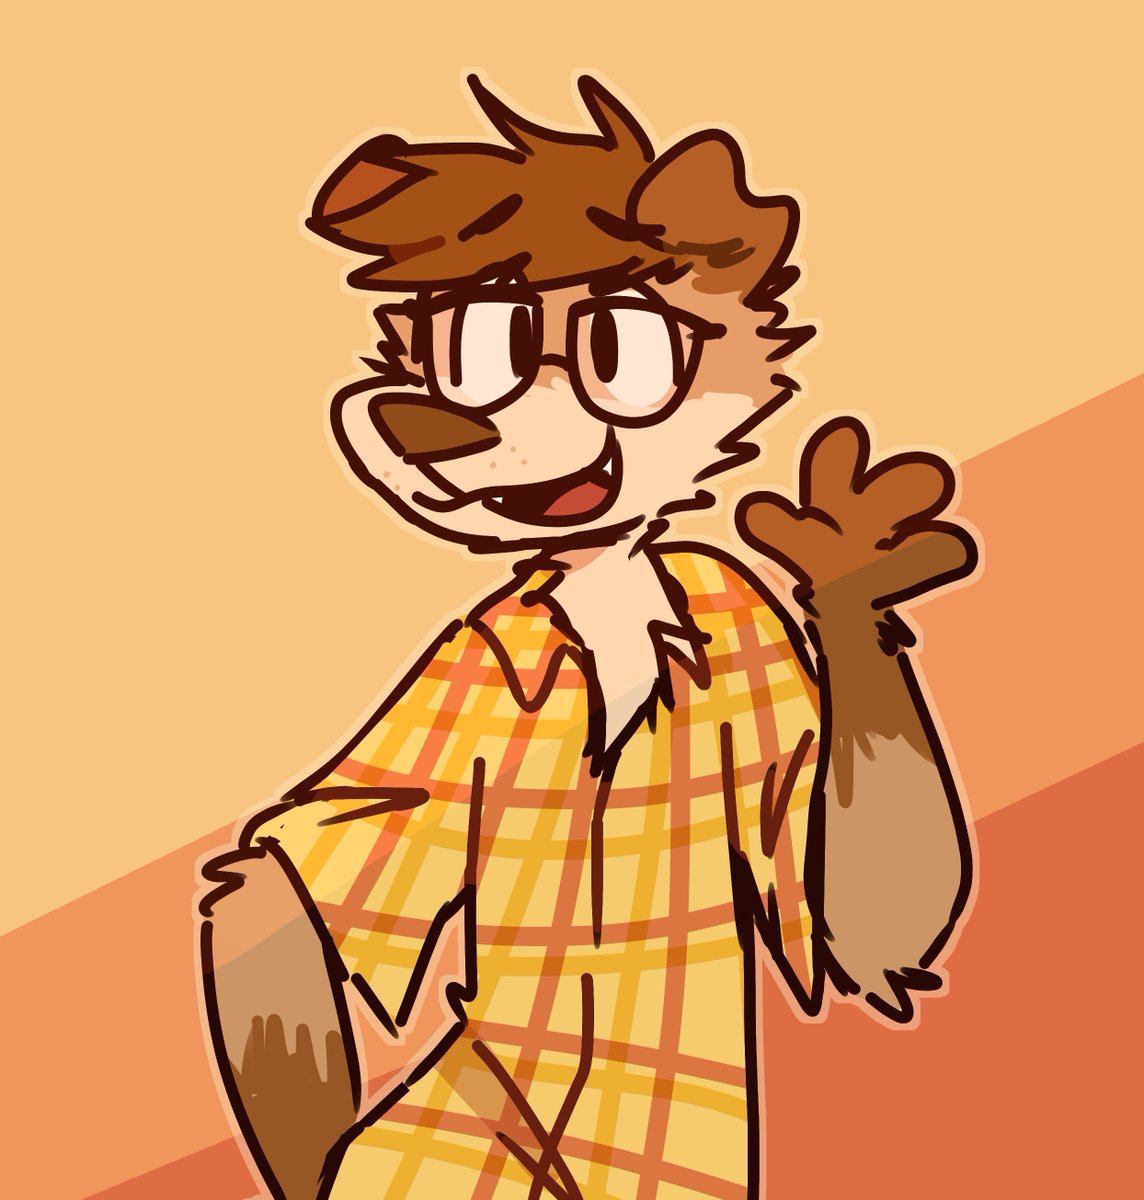 About My Fursona 🐕🌟

Name: Alfyn
Gender: Male
Species: Dog
Fav Color: Yellow!!
Main Sona: Of course <3
Fun Fact: colorblind (irl too) 
Fav Quality: smells like vanilla and coffee
1st OC: yesss, with some fur colors change